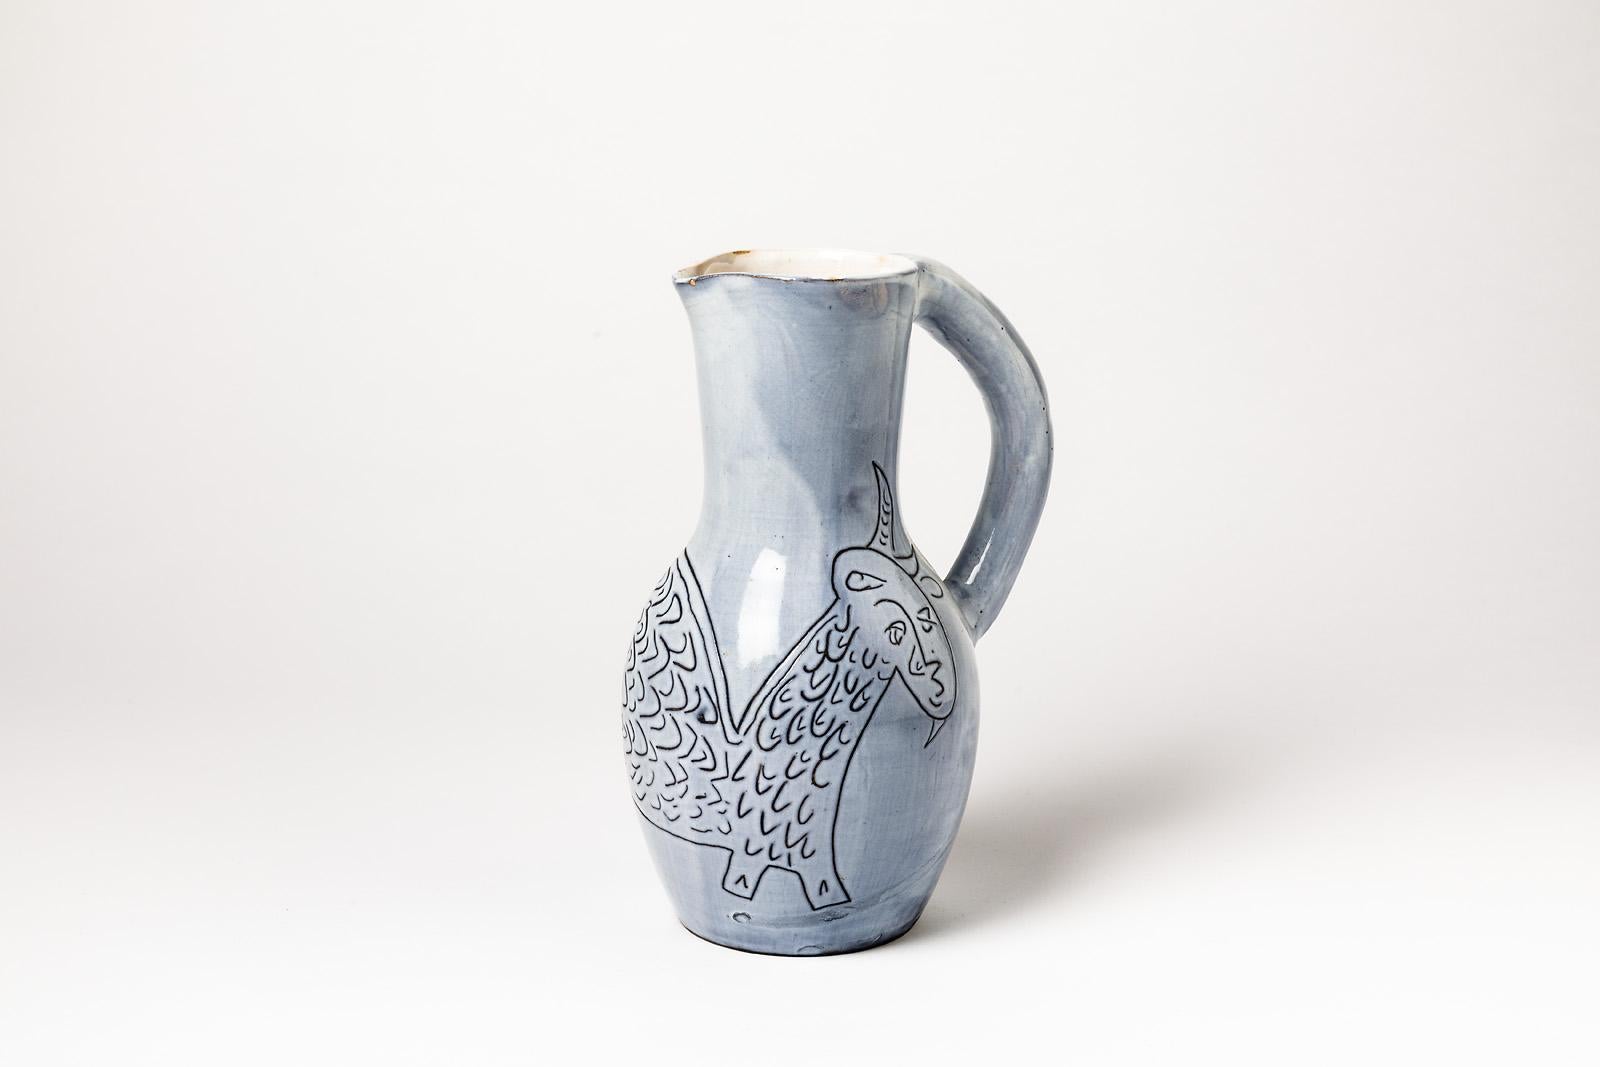 A ceramic pitcher by Jacques Innocenti to Vallauris.
Perfect original conditions.
Handwritten signature under the base 